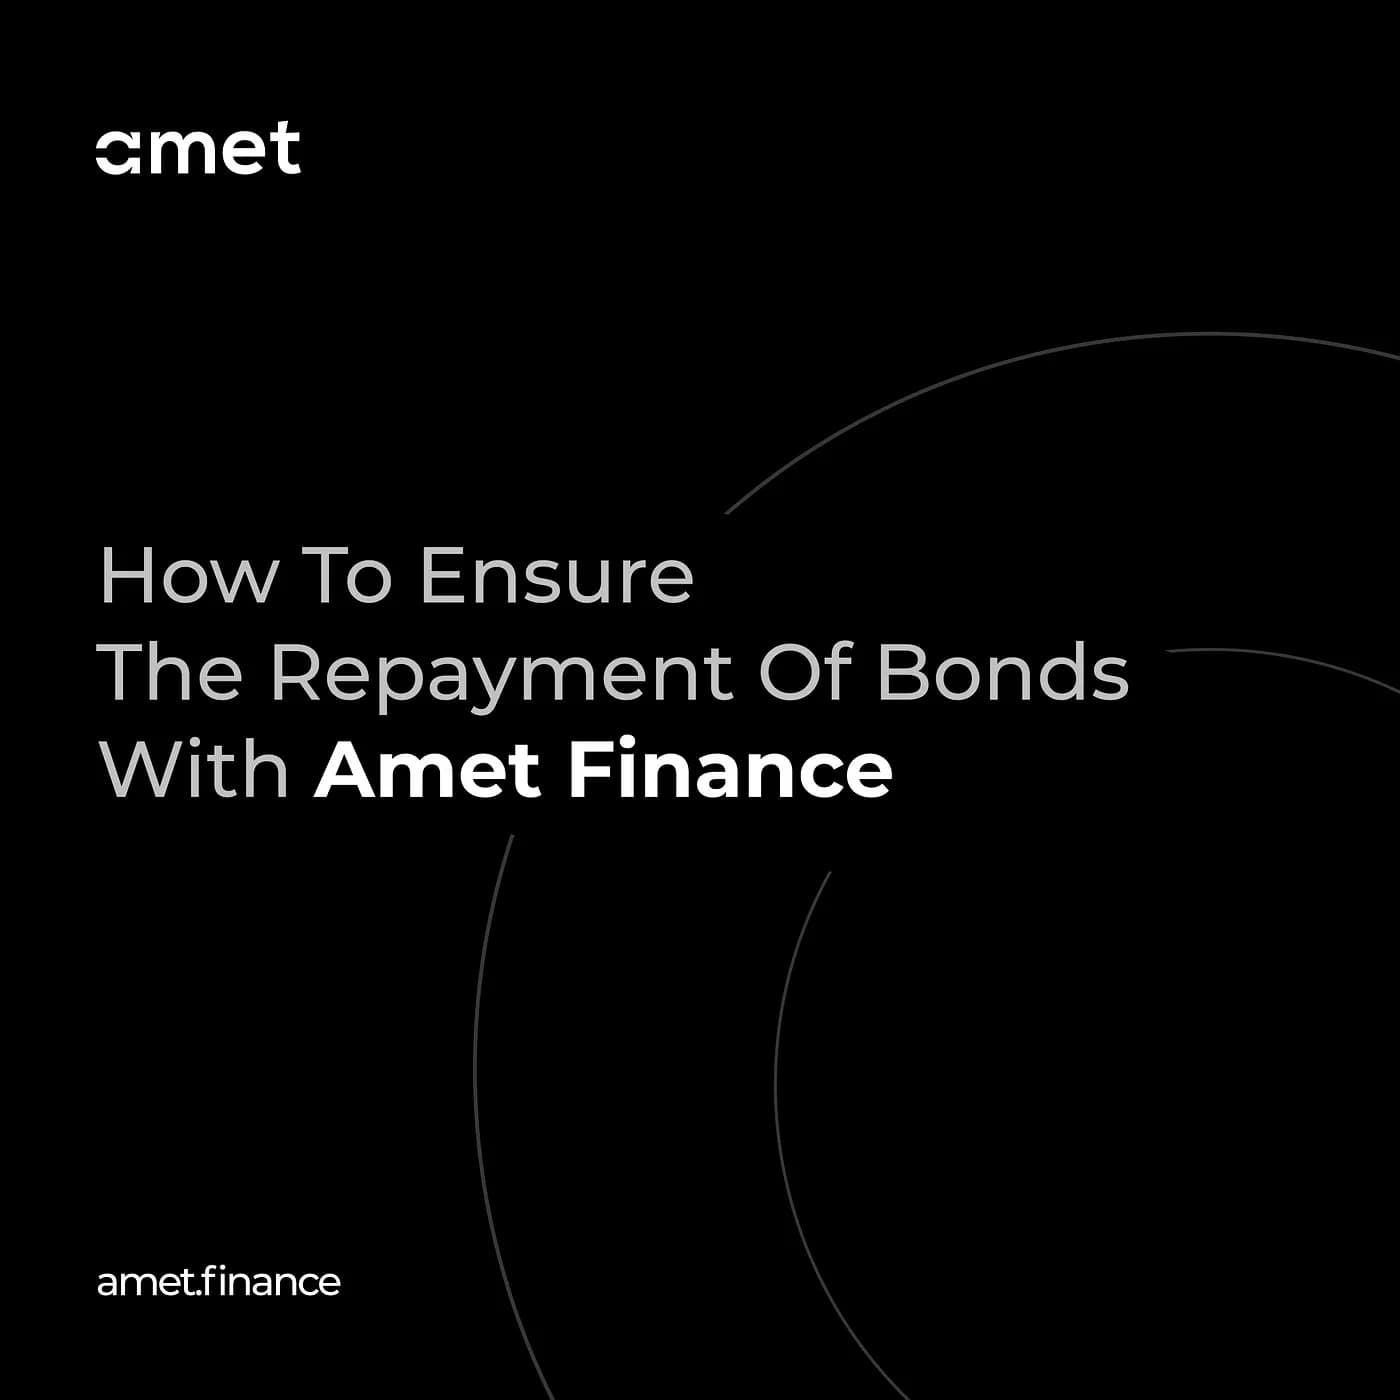 How to Ensure the Repayment of Bonds with Amet Finance